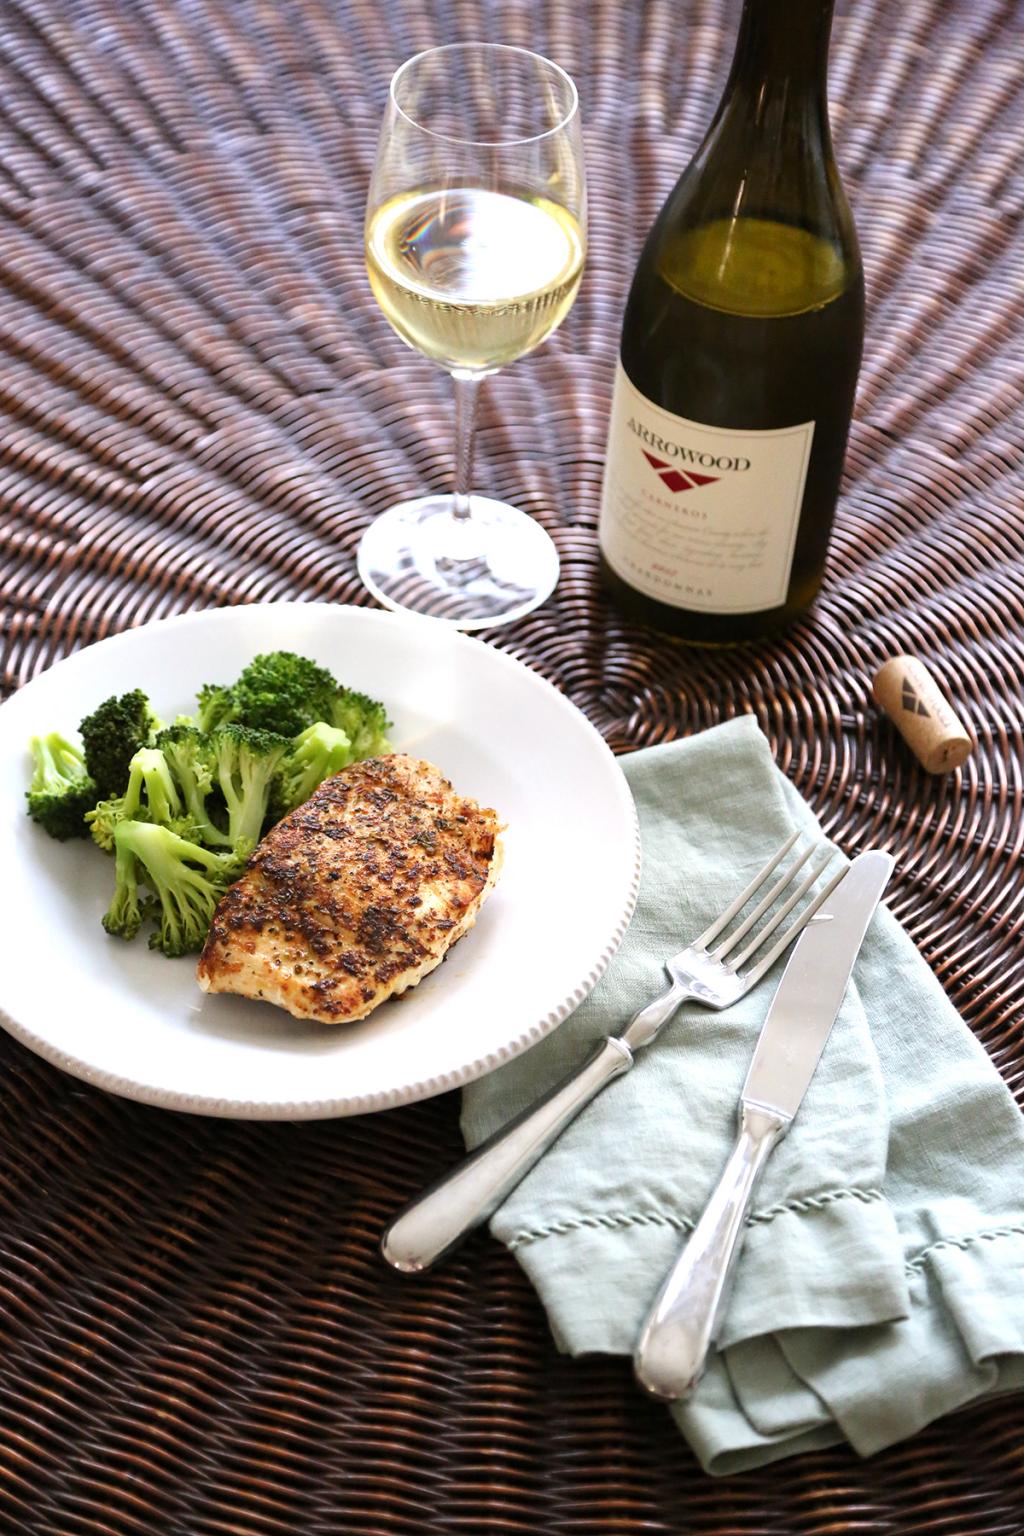 A bottle of Arrowood Chardonnay on a table with plated meal of fish and broccolli. 